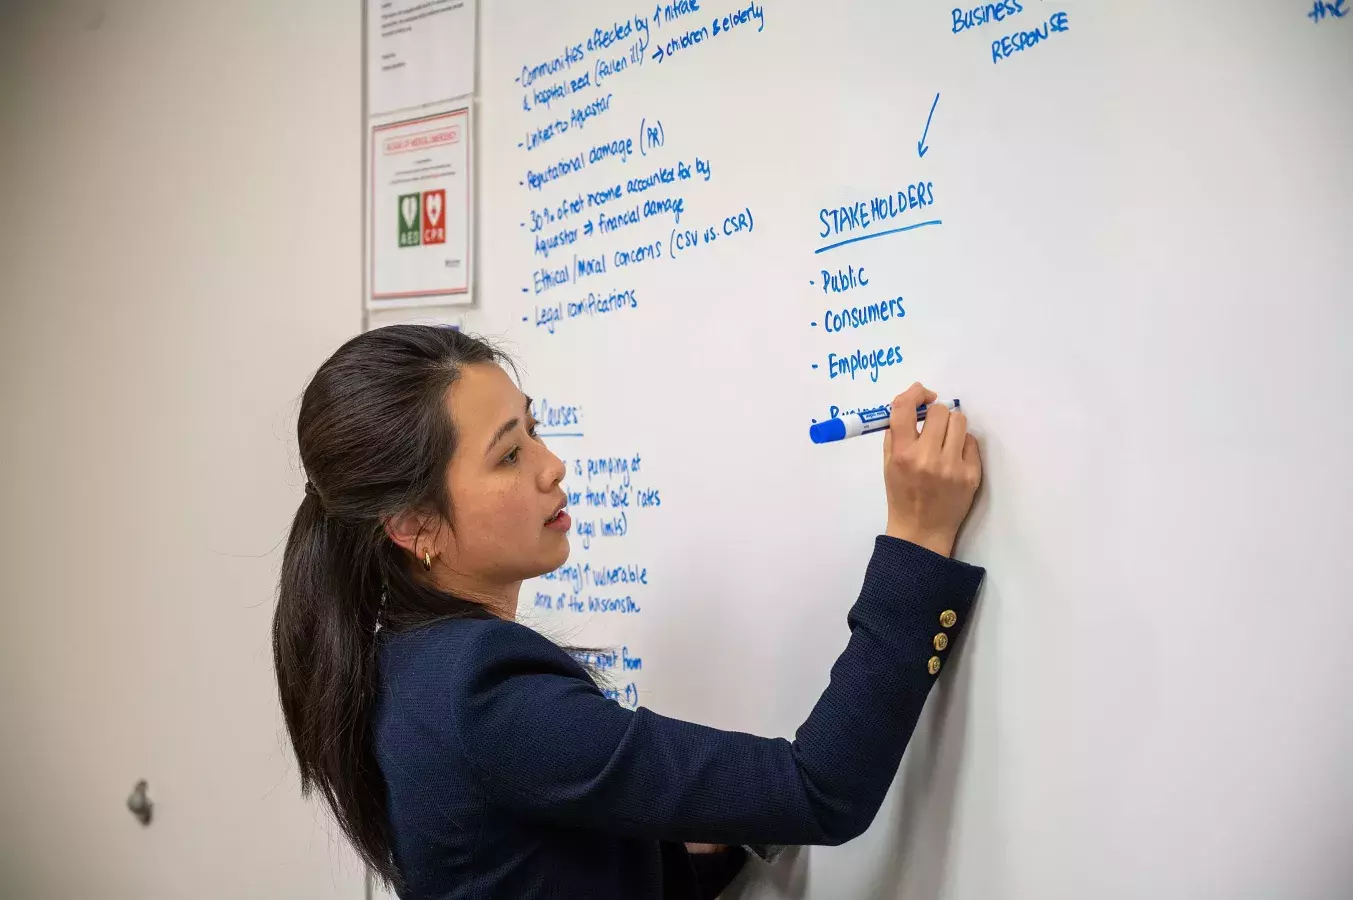 professor writing on a white board about the stakeholders of a toxic spill